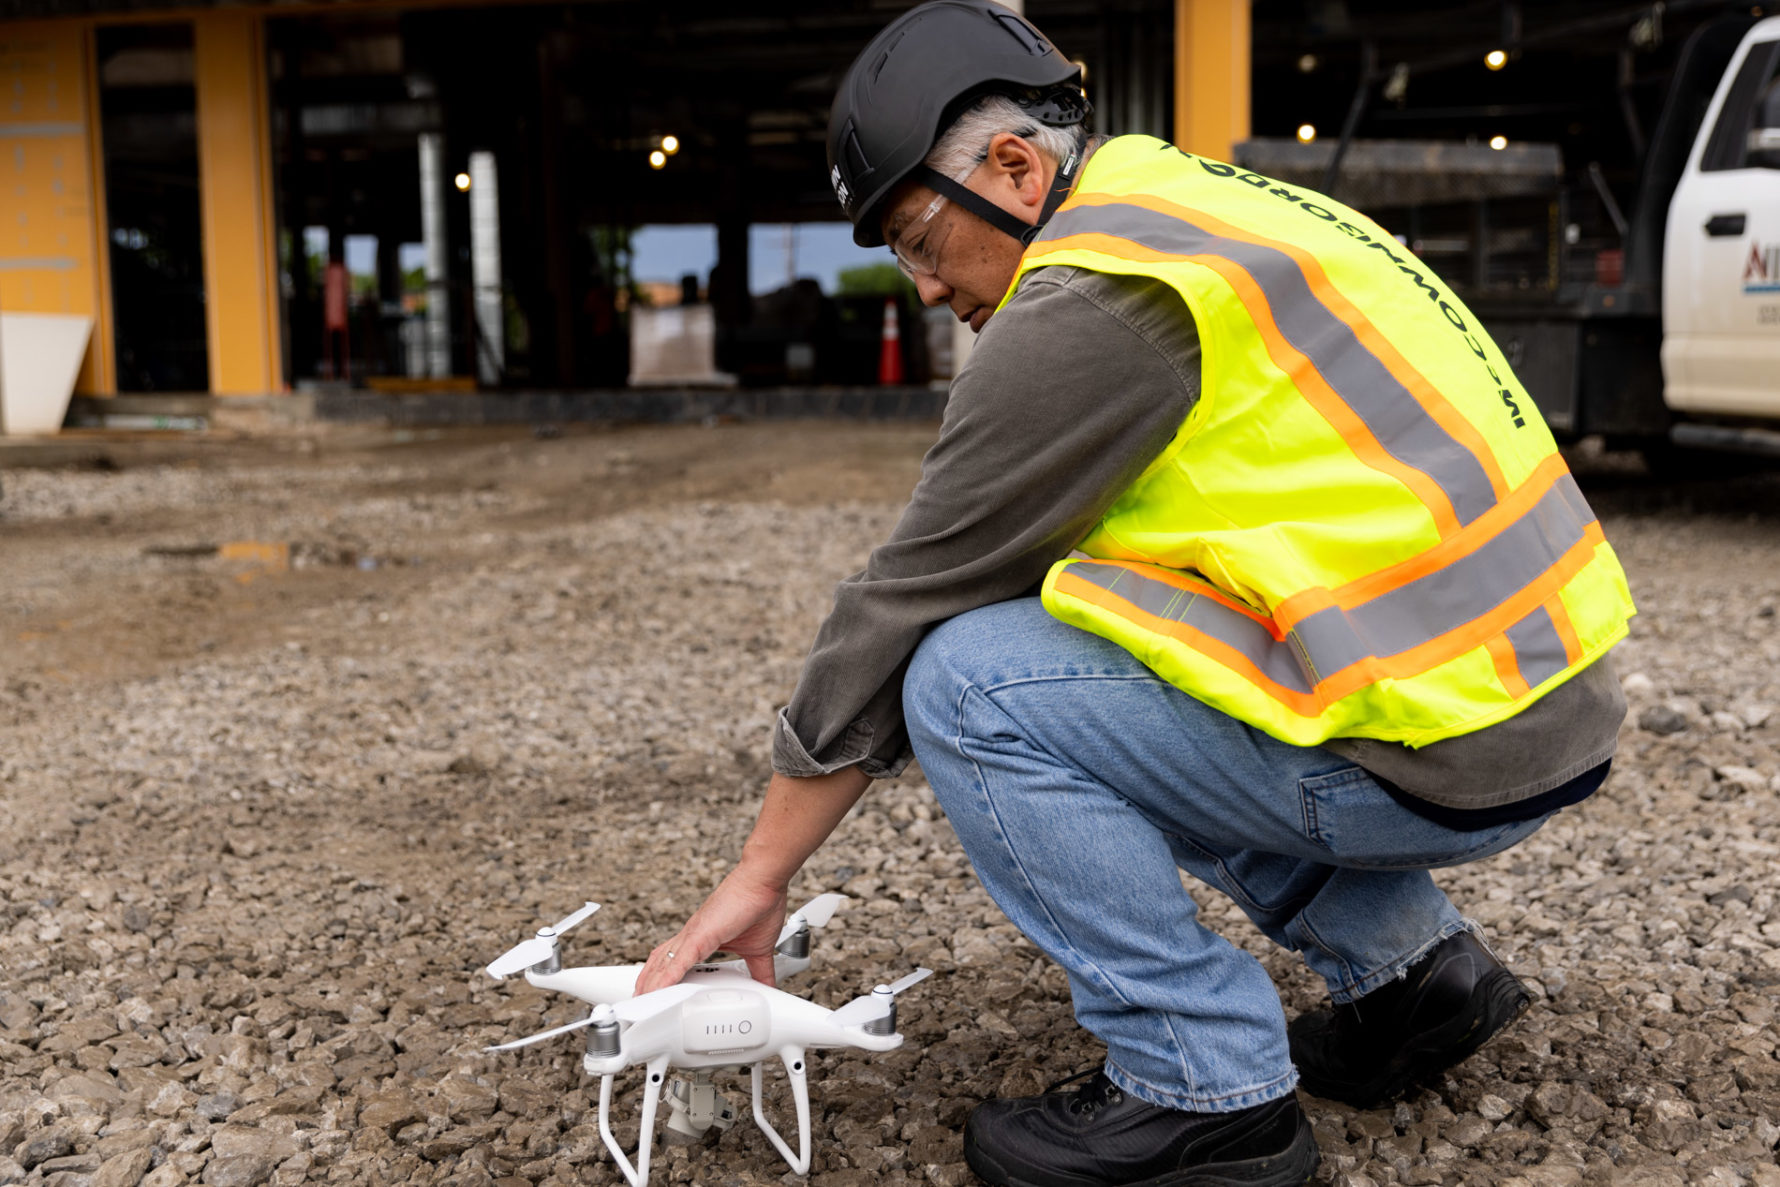 A McCownGordon Construction associate preparing to fly a drone on a job site